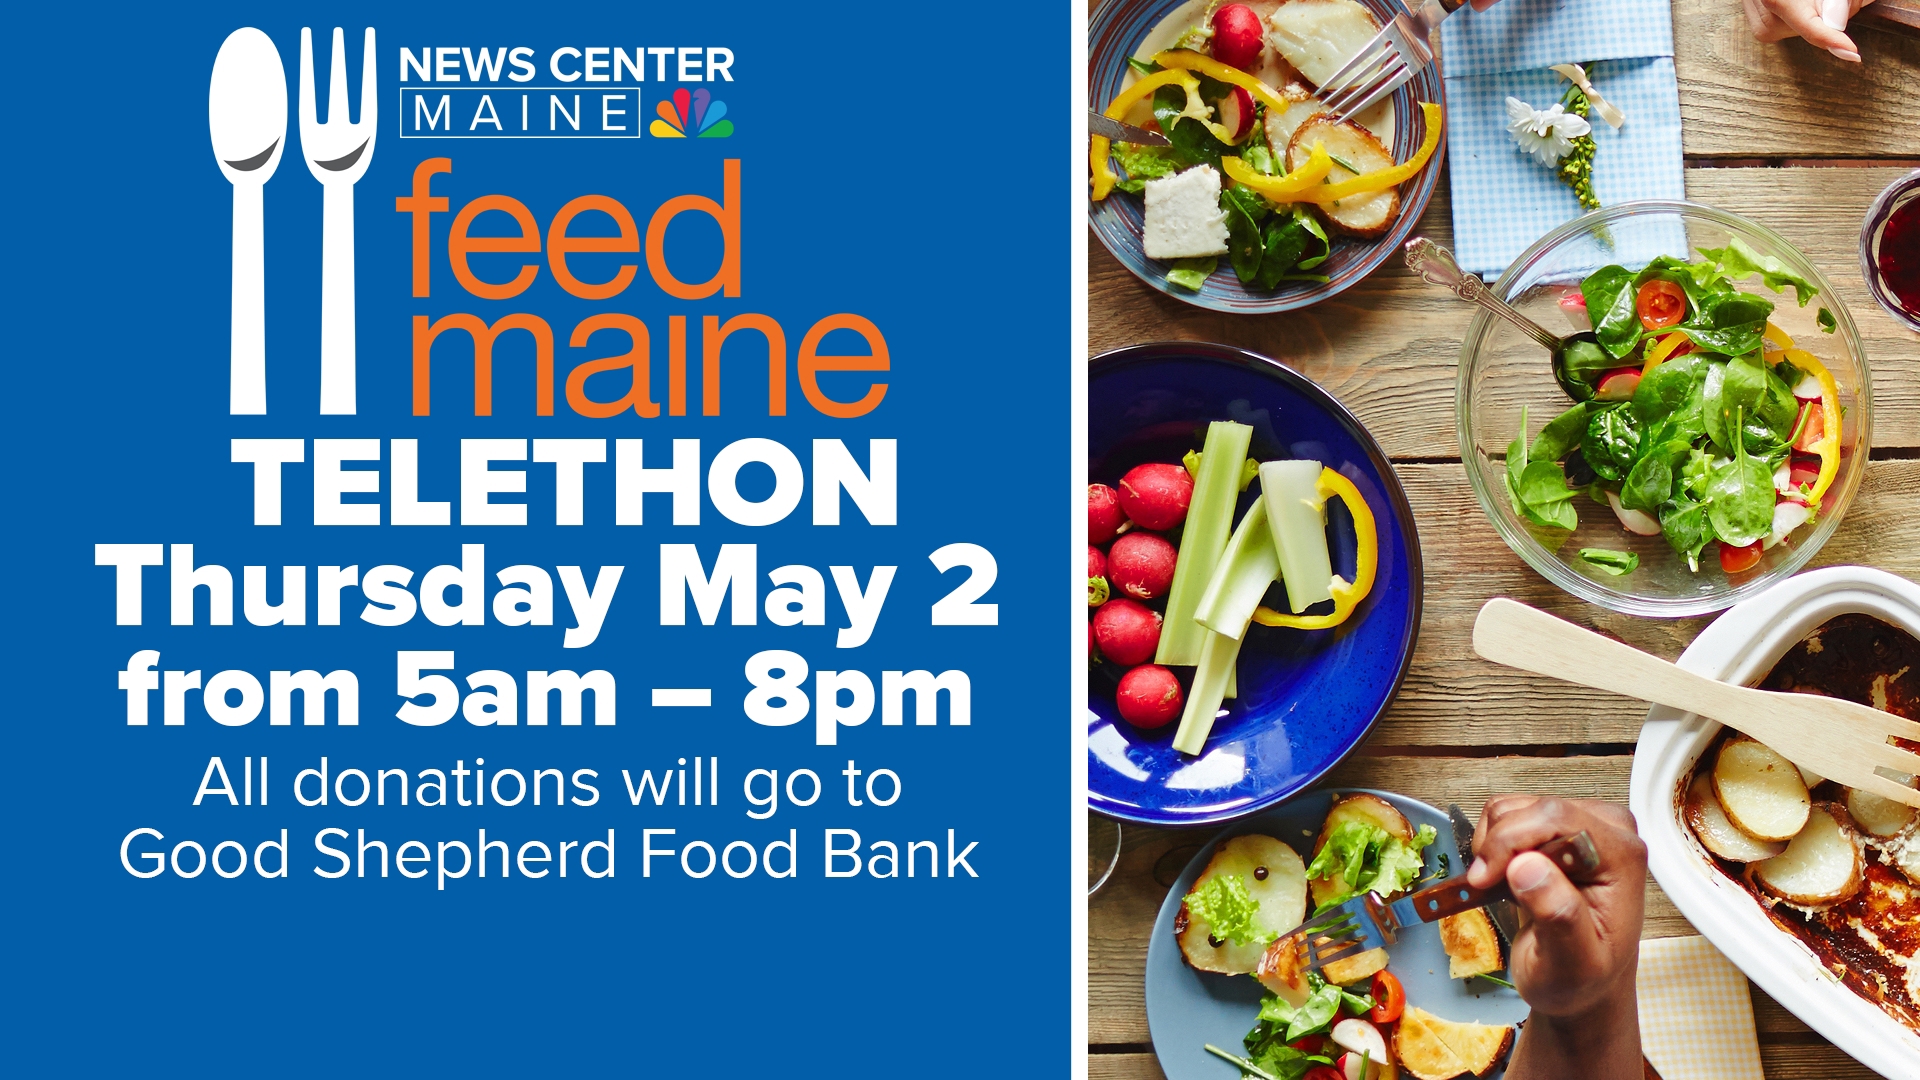 Join us on Thursday, May 2 for our Feed Maine Telethon from 5a.m. to 8p.m.